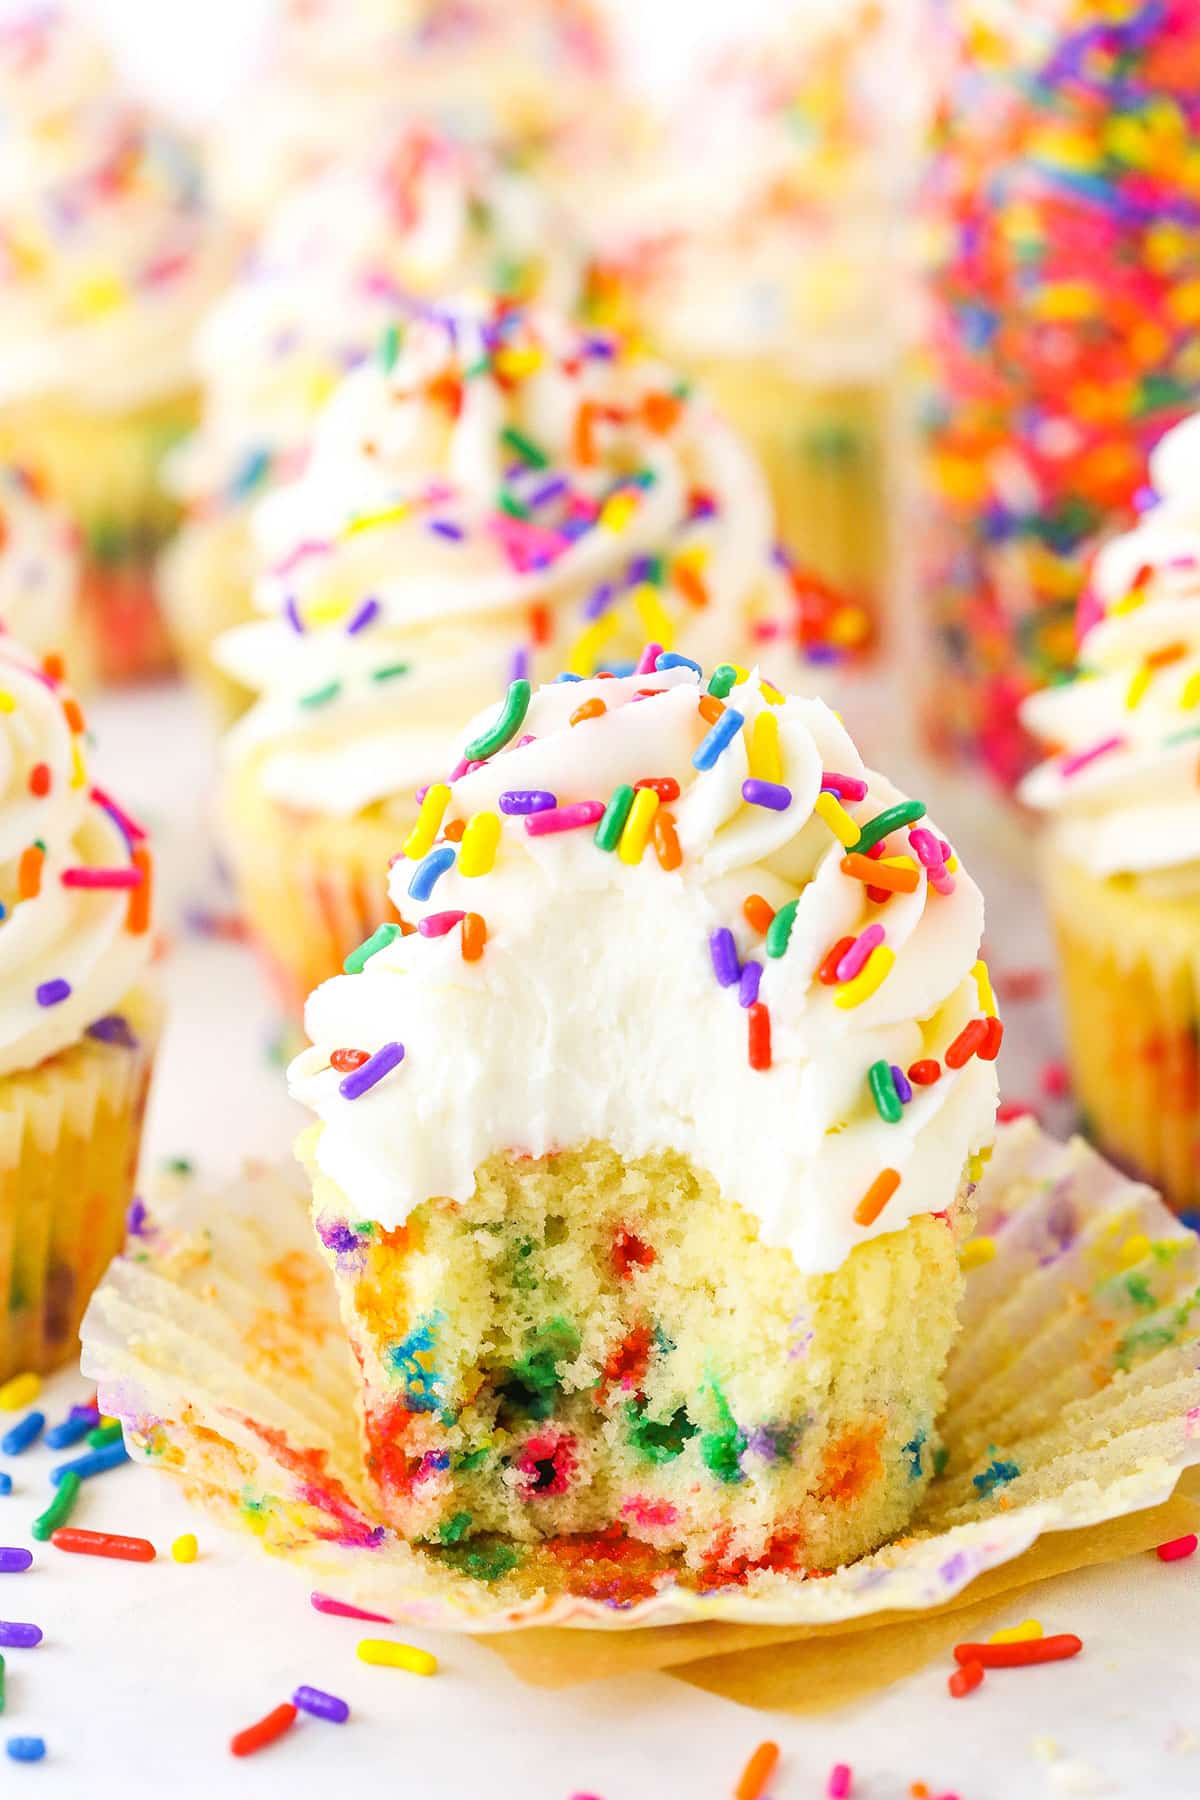 A Homemade Funfetti Cupcake with a bite taken out topped with white frosting and colorful sprinkles